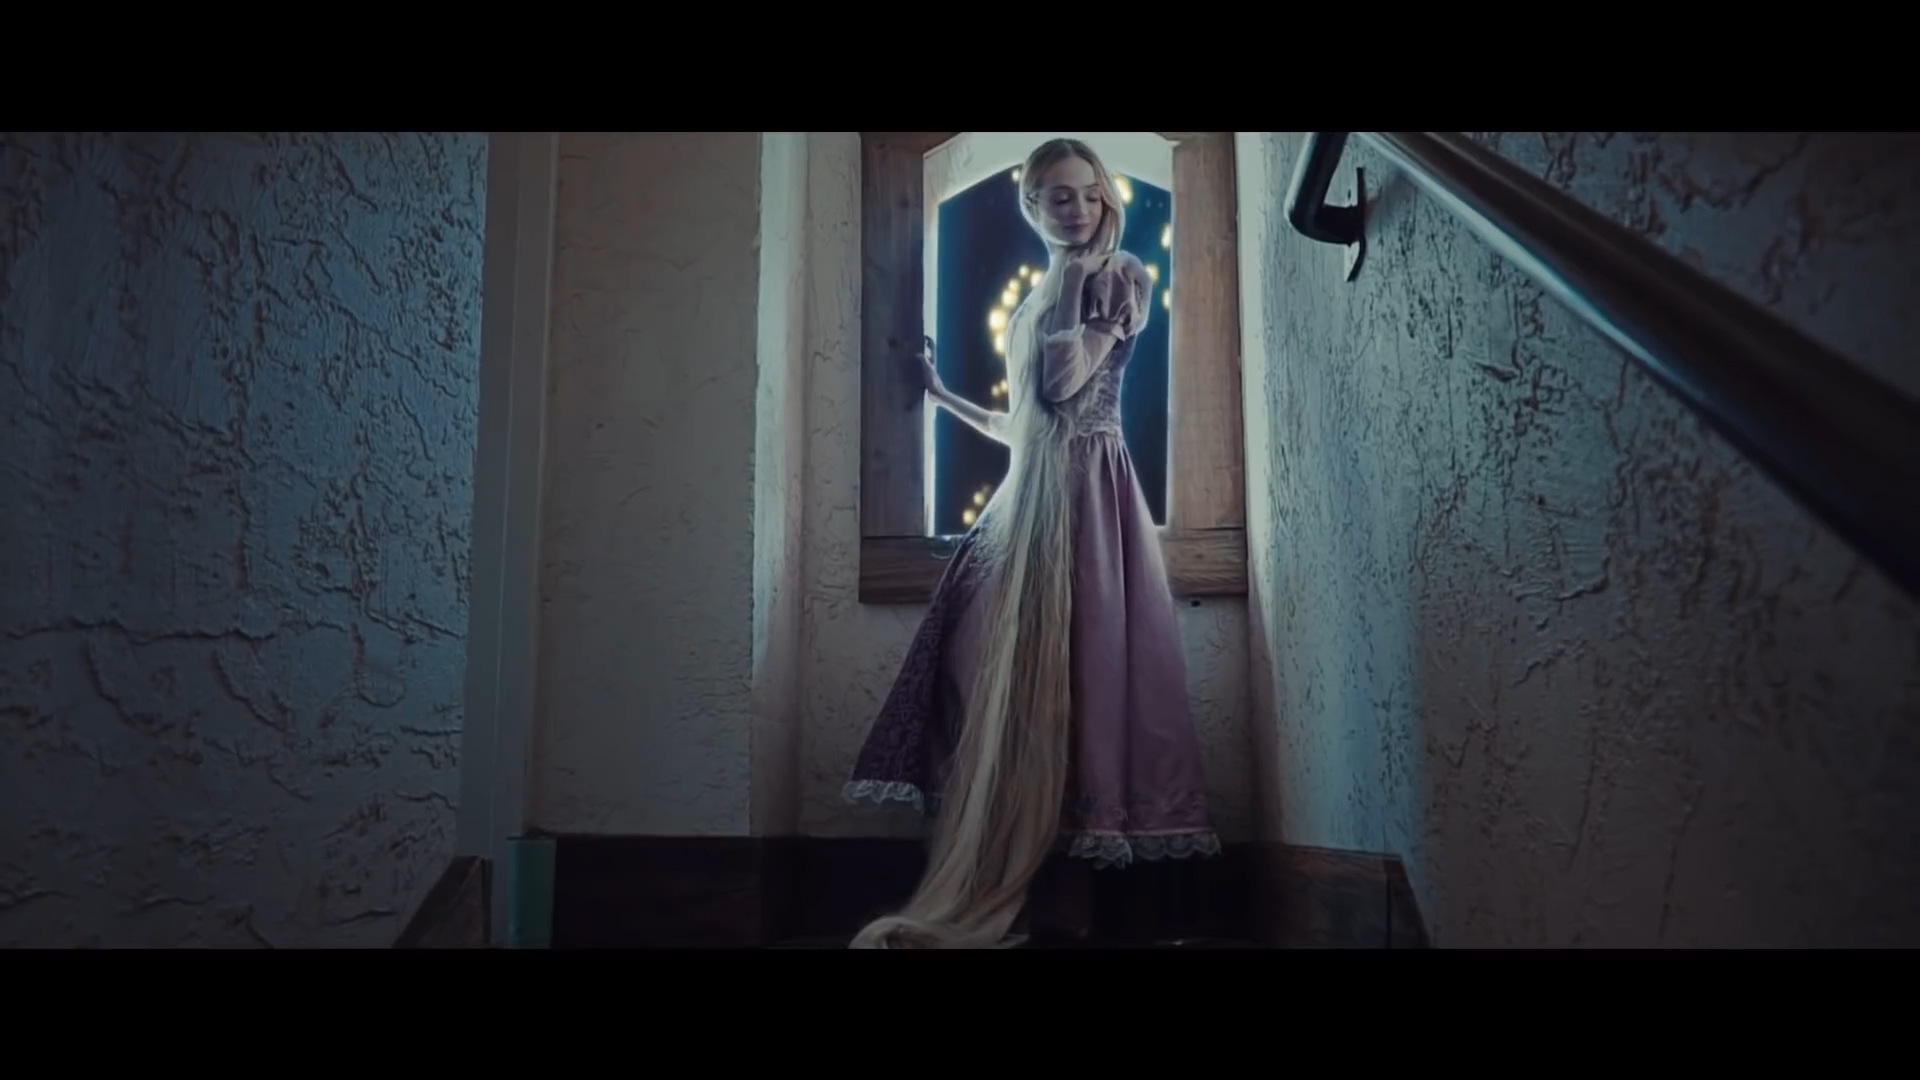 PHOTO: Sarah Ingle wore 8-foot extensions to play Rapunzel in her live-action "Tangled" video.